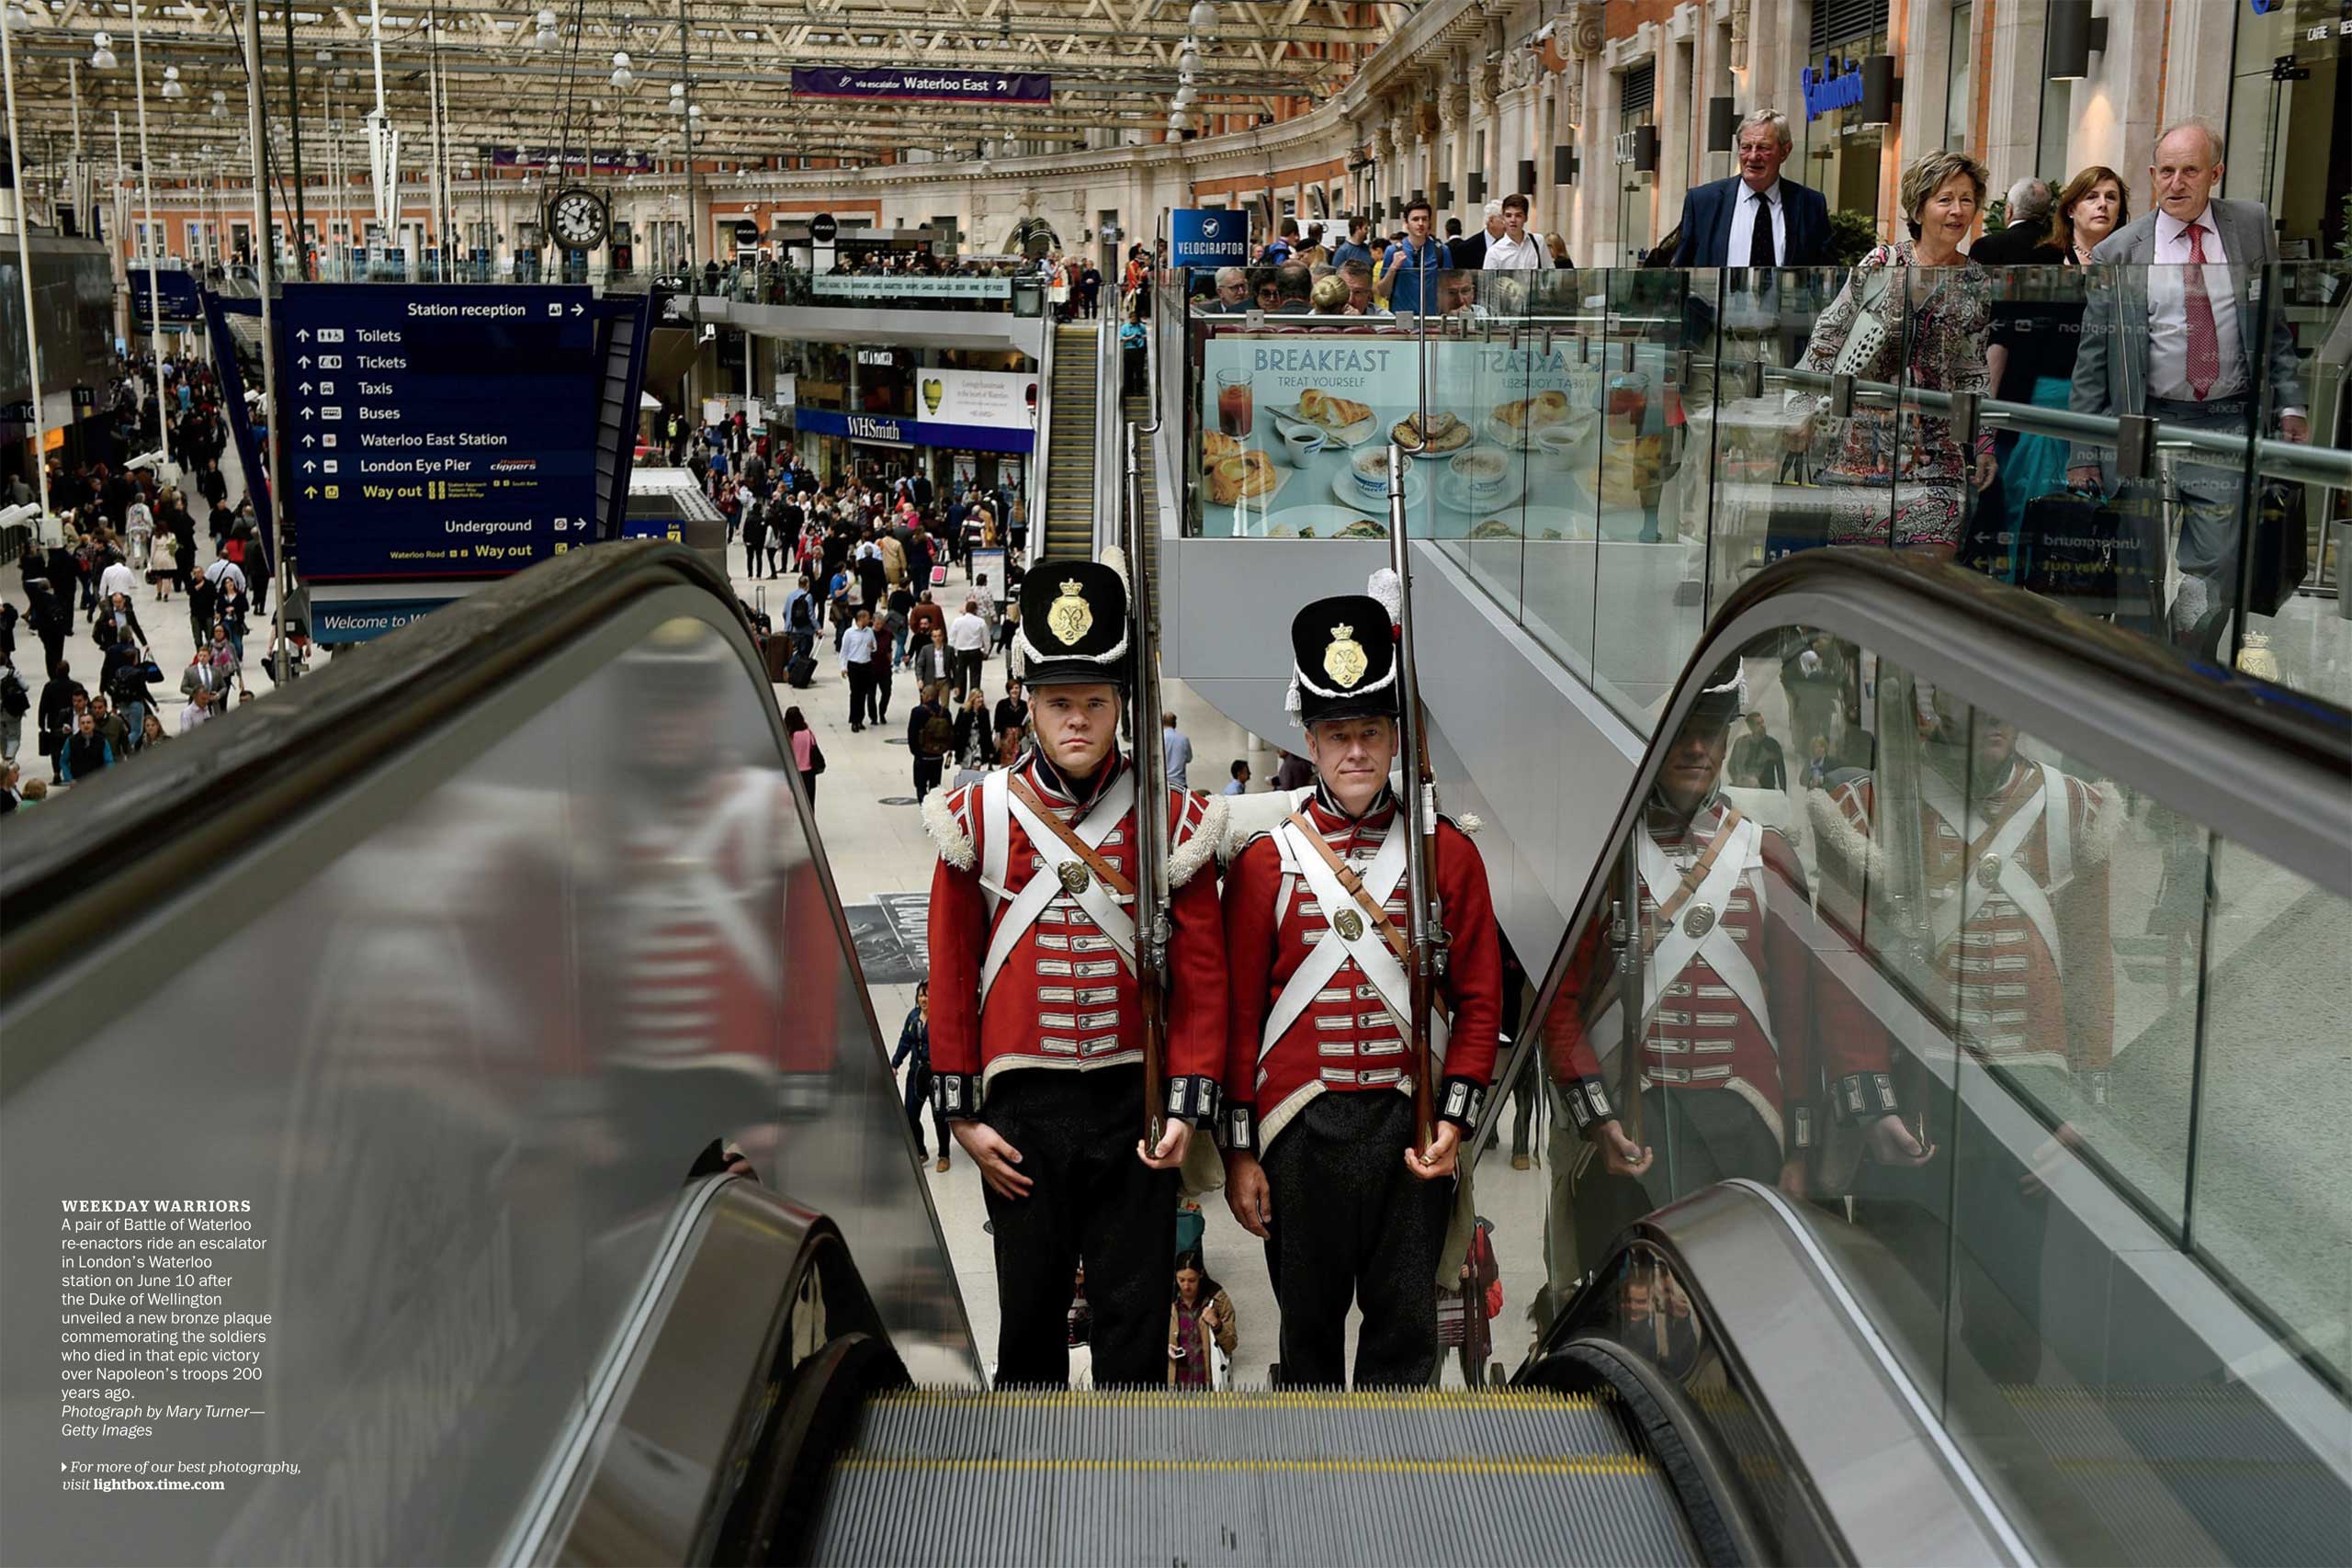 Photograph  by Mary Turner—Getty ImagesA pair of Battle of Waterloo re-enactors ride an escalator in London's Waterloo station on June 10 after the Duke of Wellington unveiled a new bronze plaque commemorating the soldiers who died in that epic victory over Napoleon's troops 200 years ago. (TIME issue June 22, 2015)